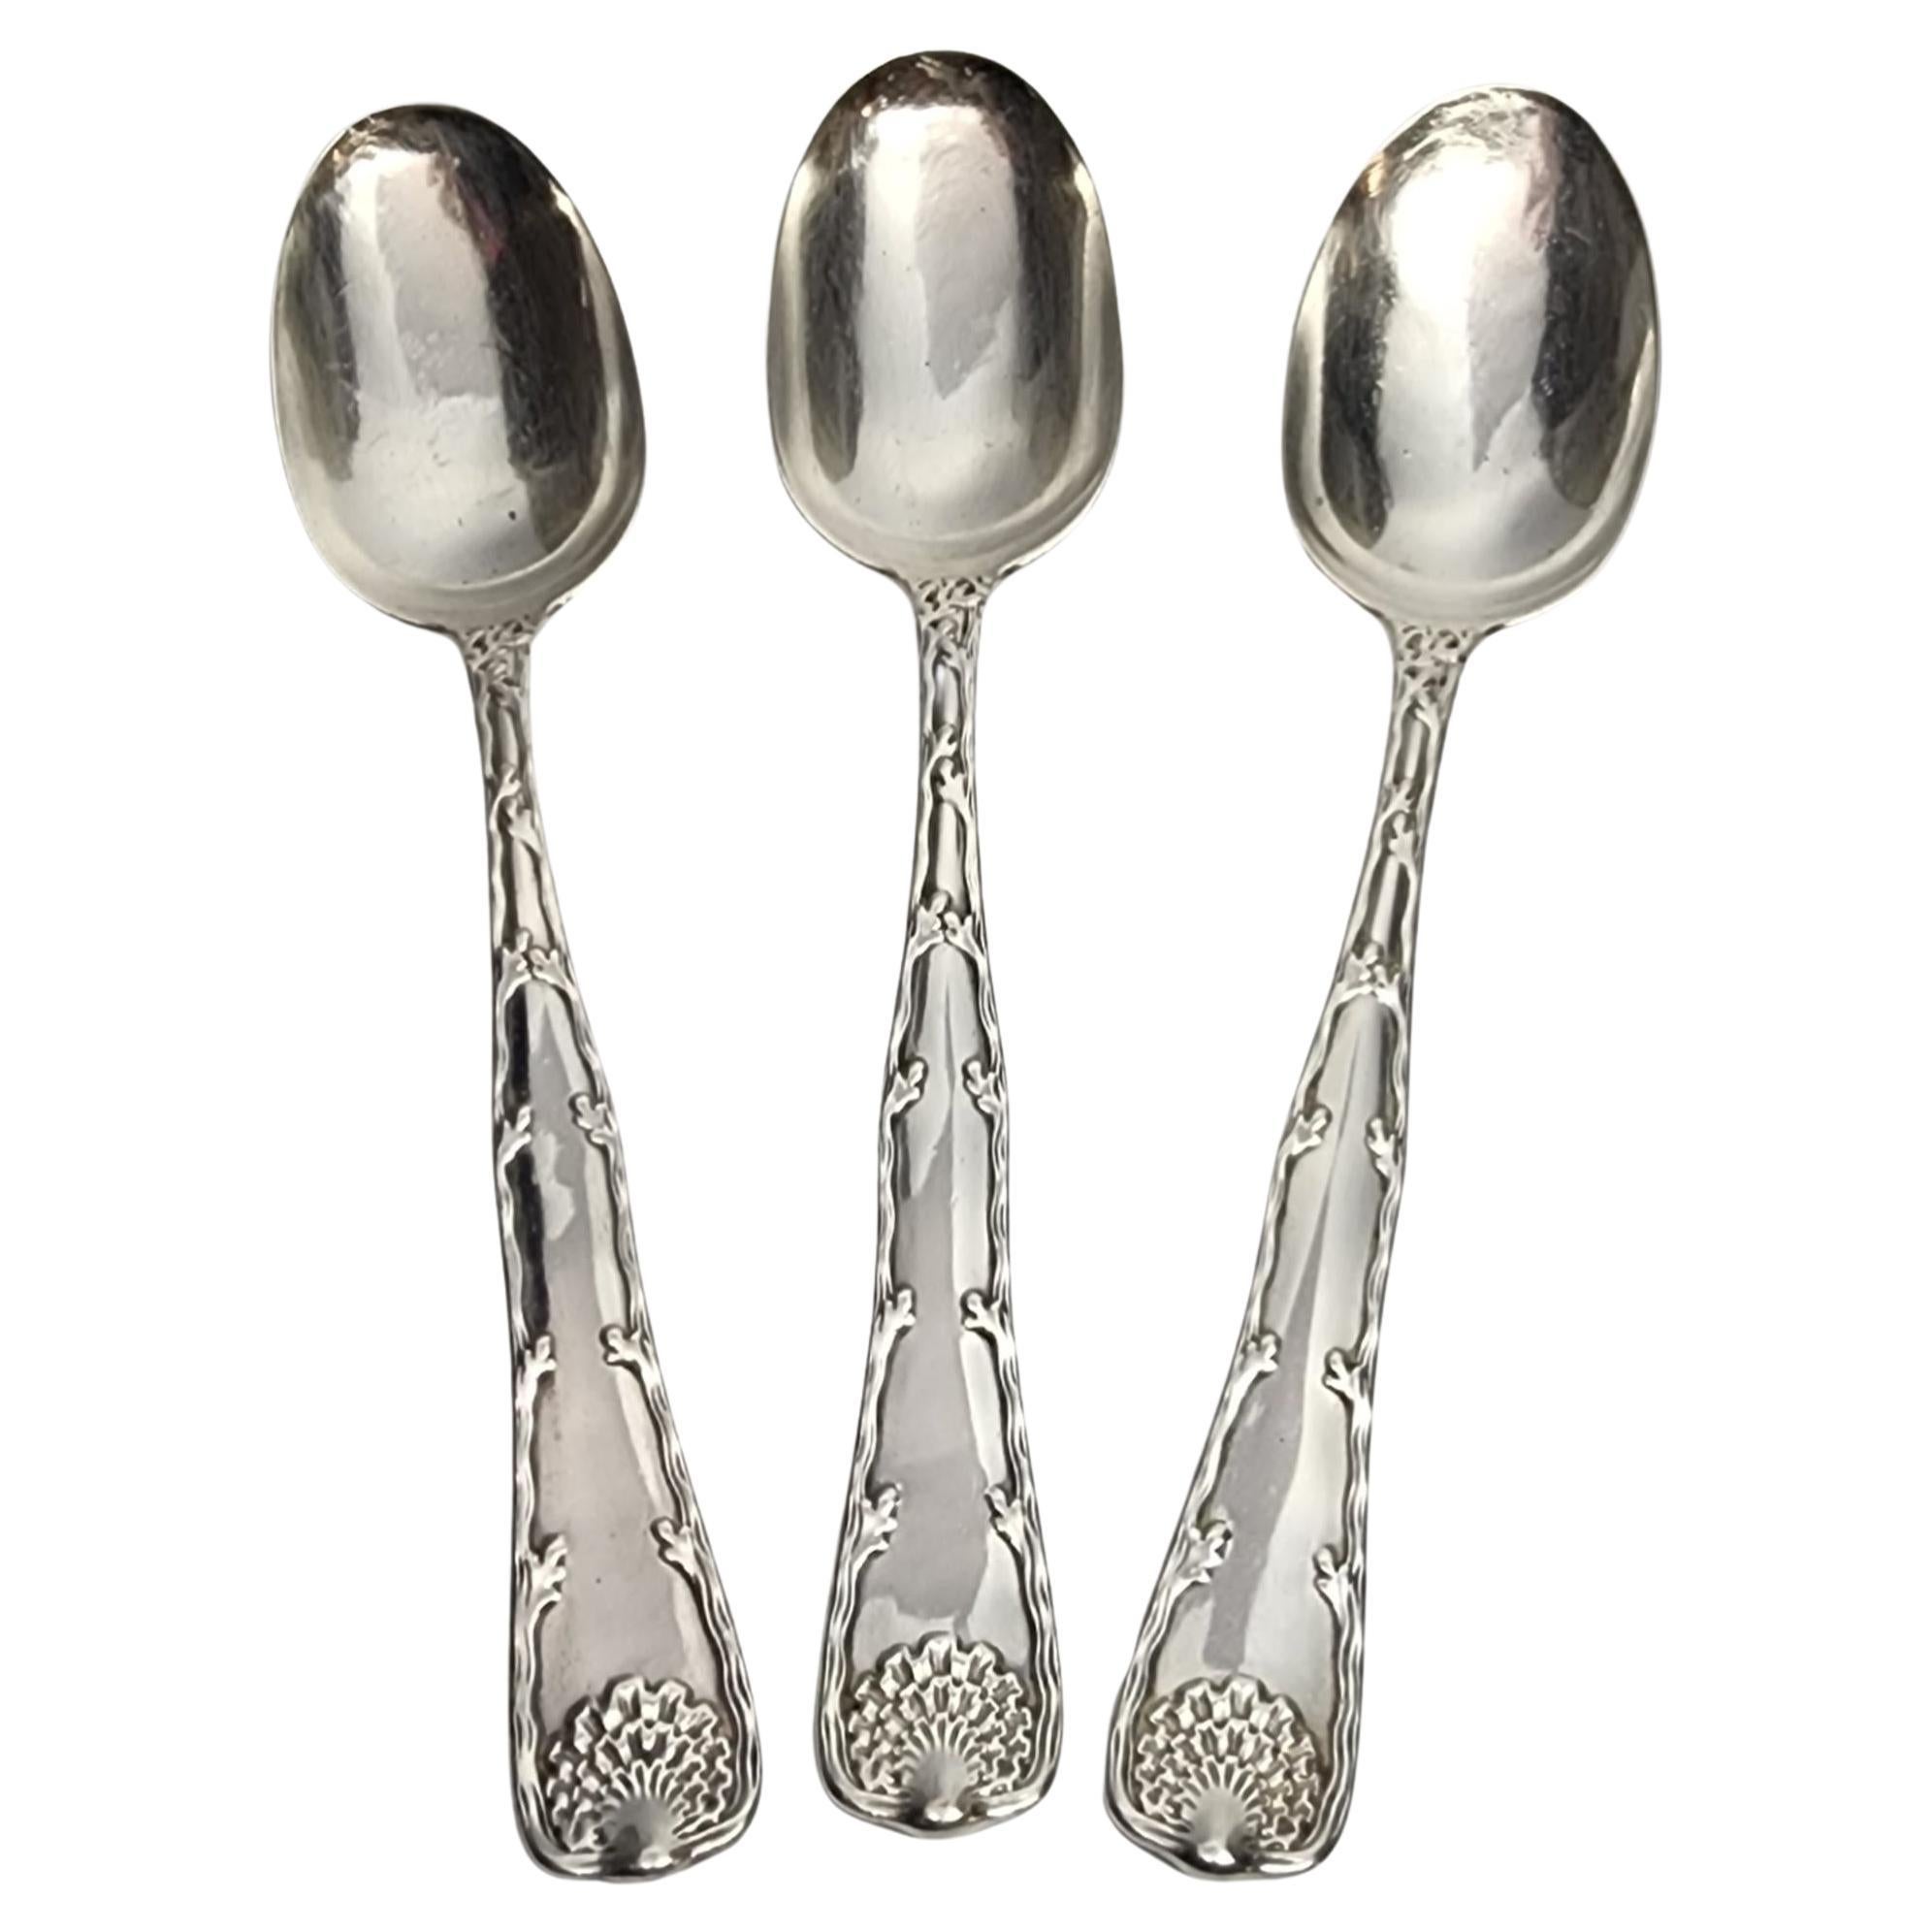 Set of 3 Tiffany & Co Wave Edge Sterling Silver Serving Tablespoon 8 1/2" #15387 For Sale